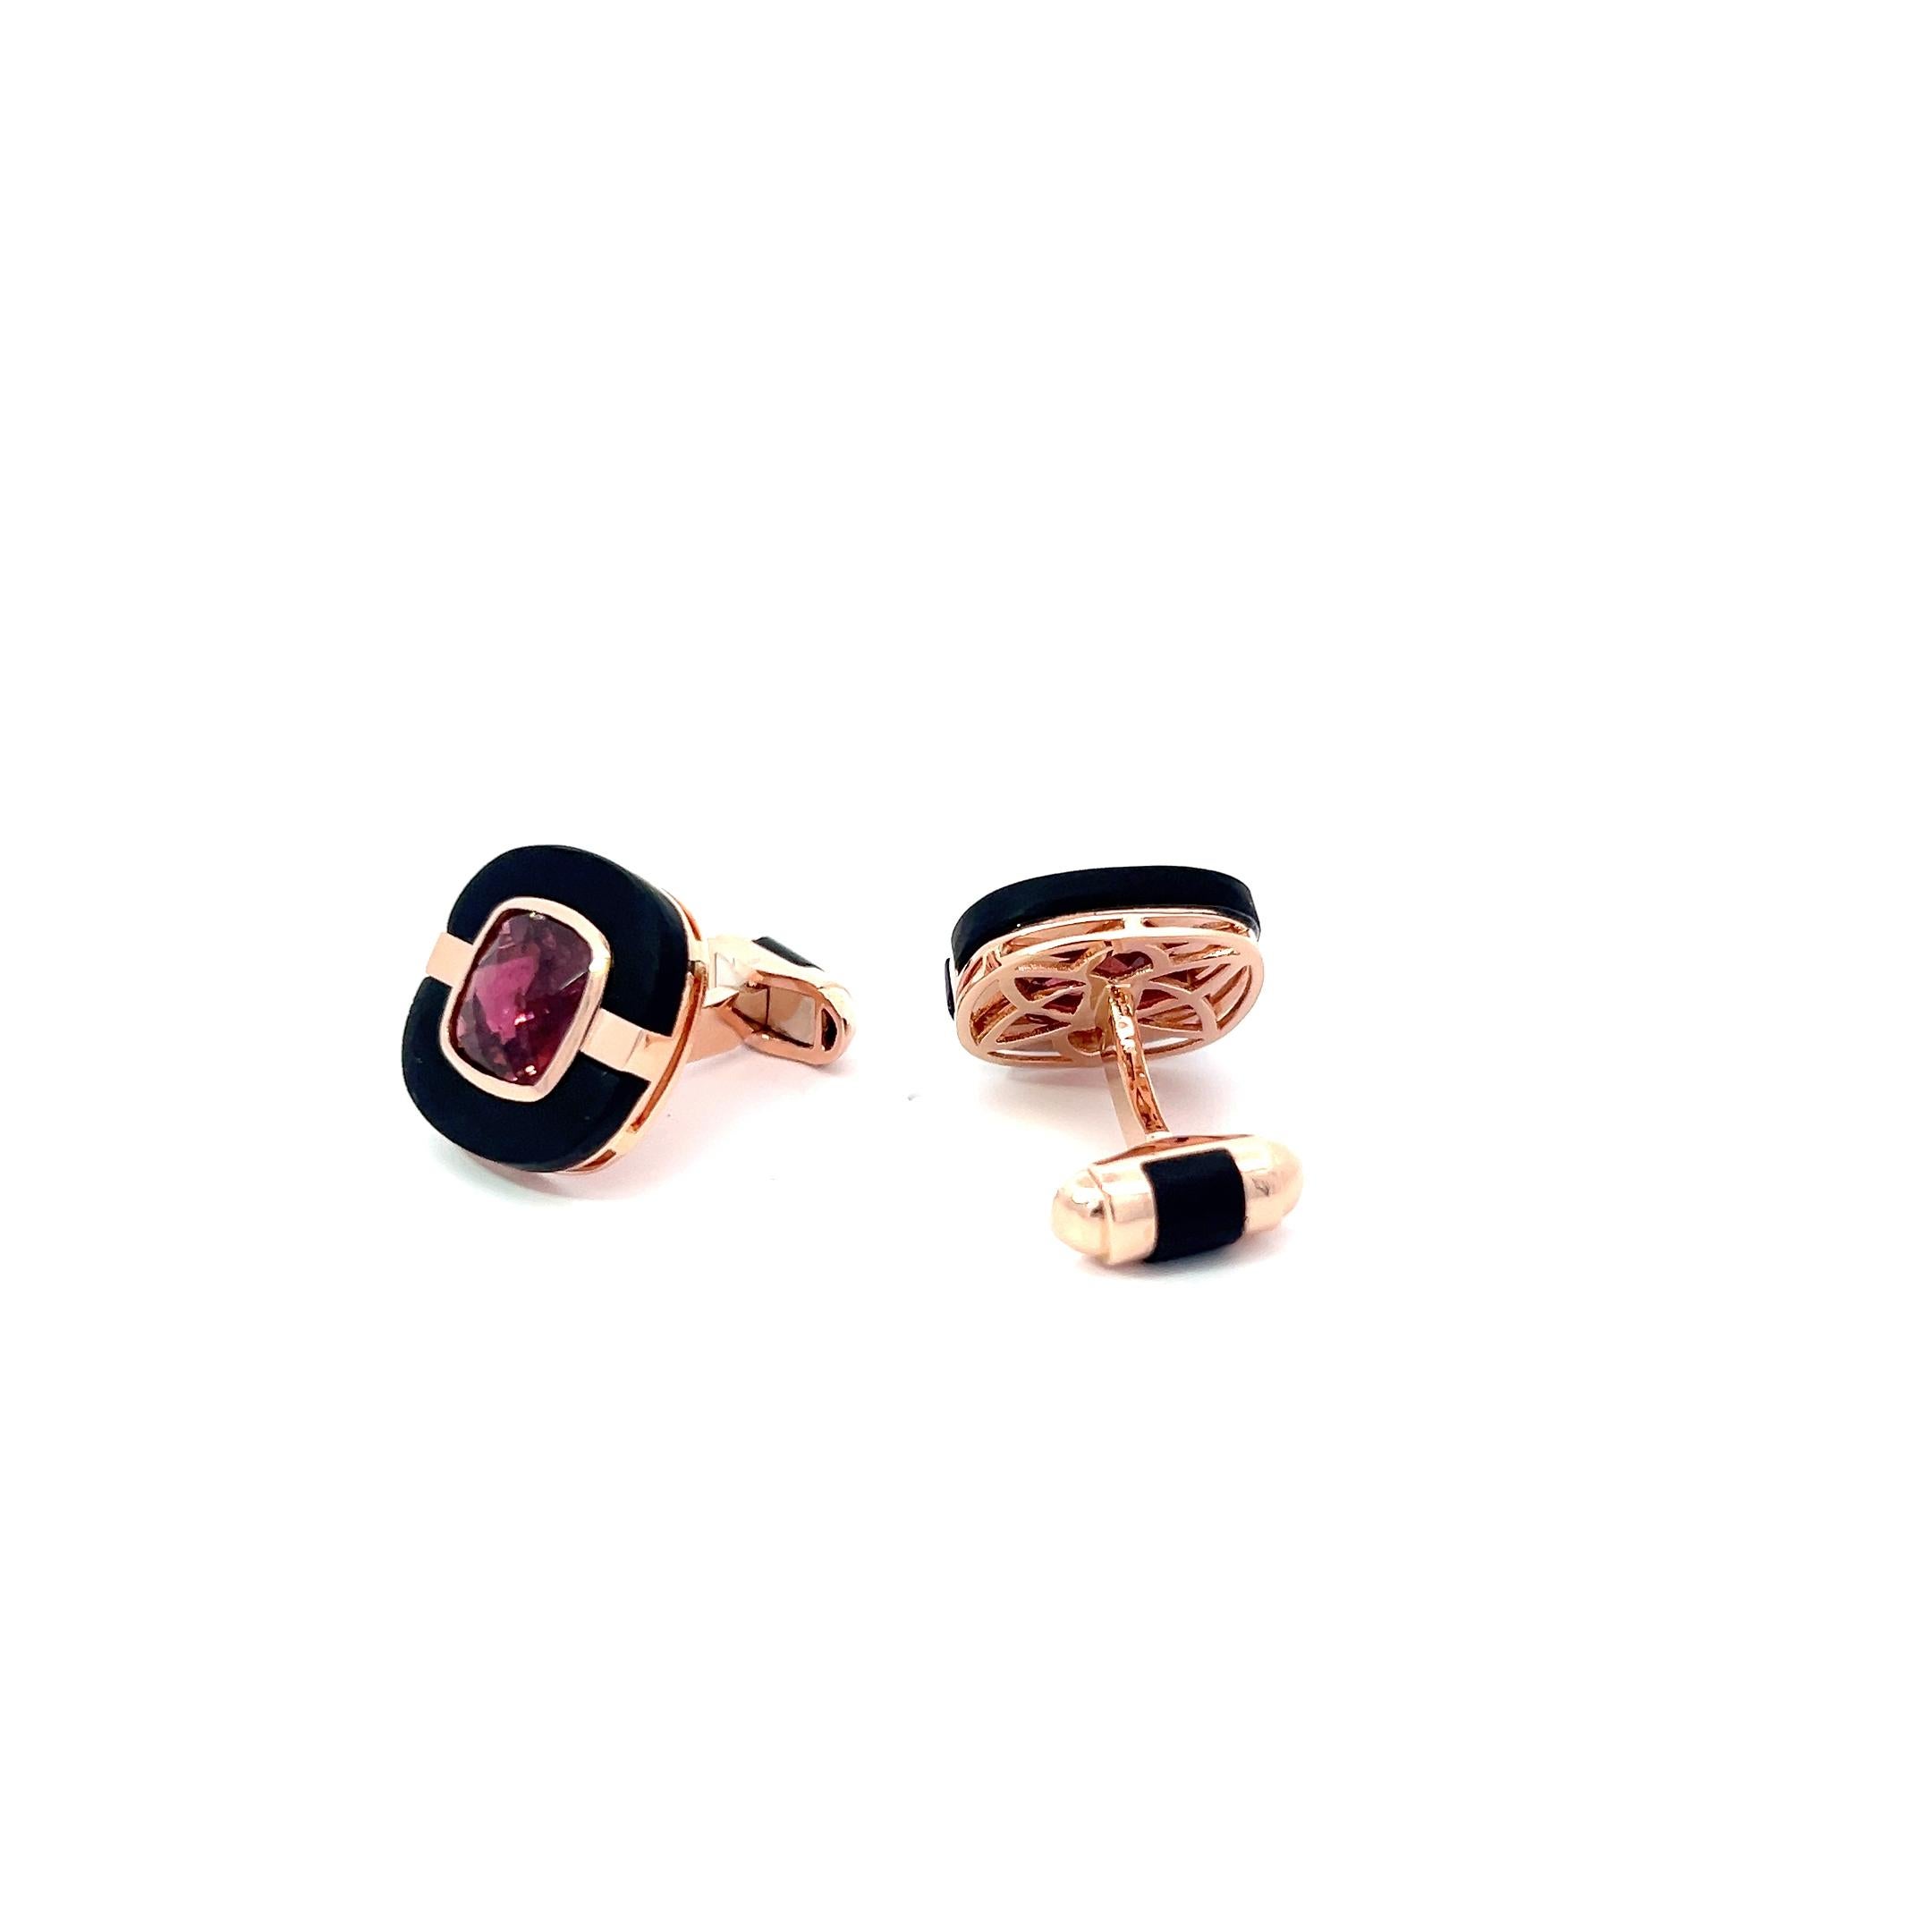 Mixed Cut 18k Rose Gold Cufflinks with Rubylite and Hand-Cut Black Onyx For Sale